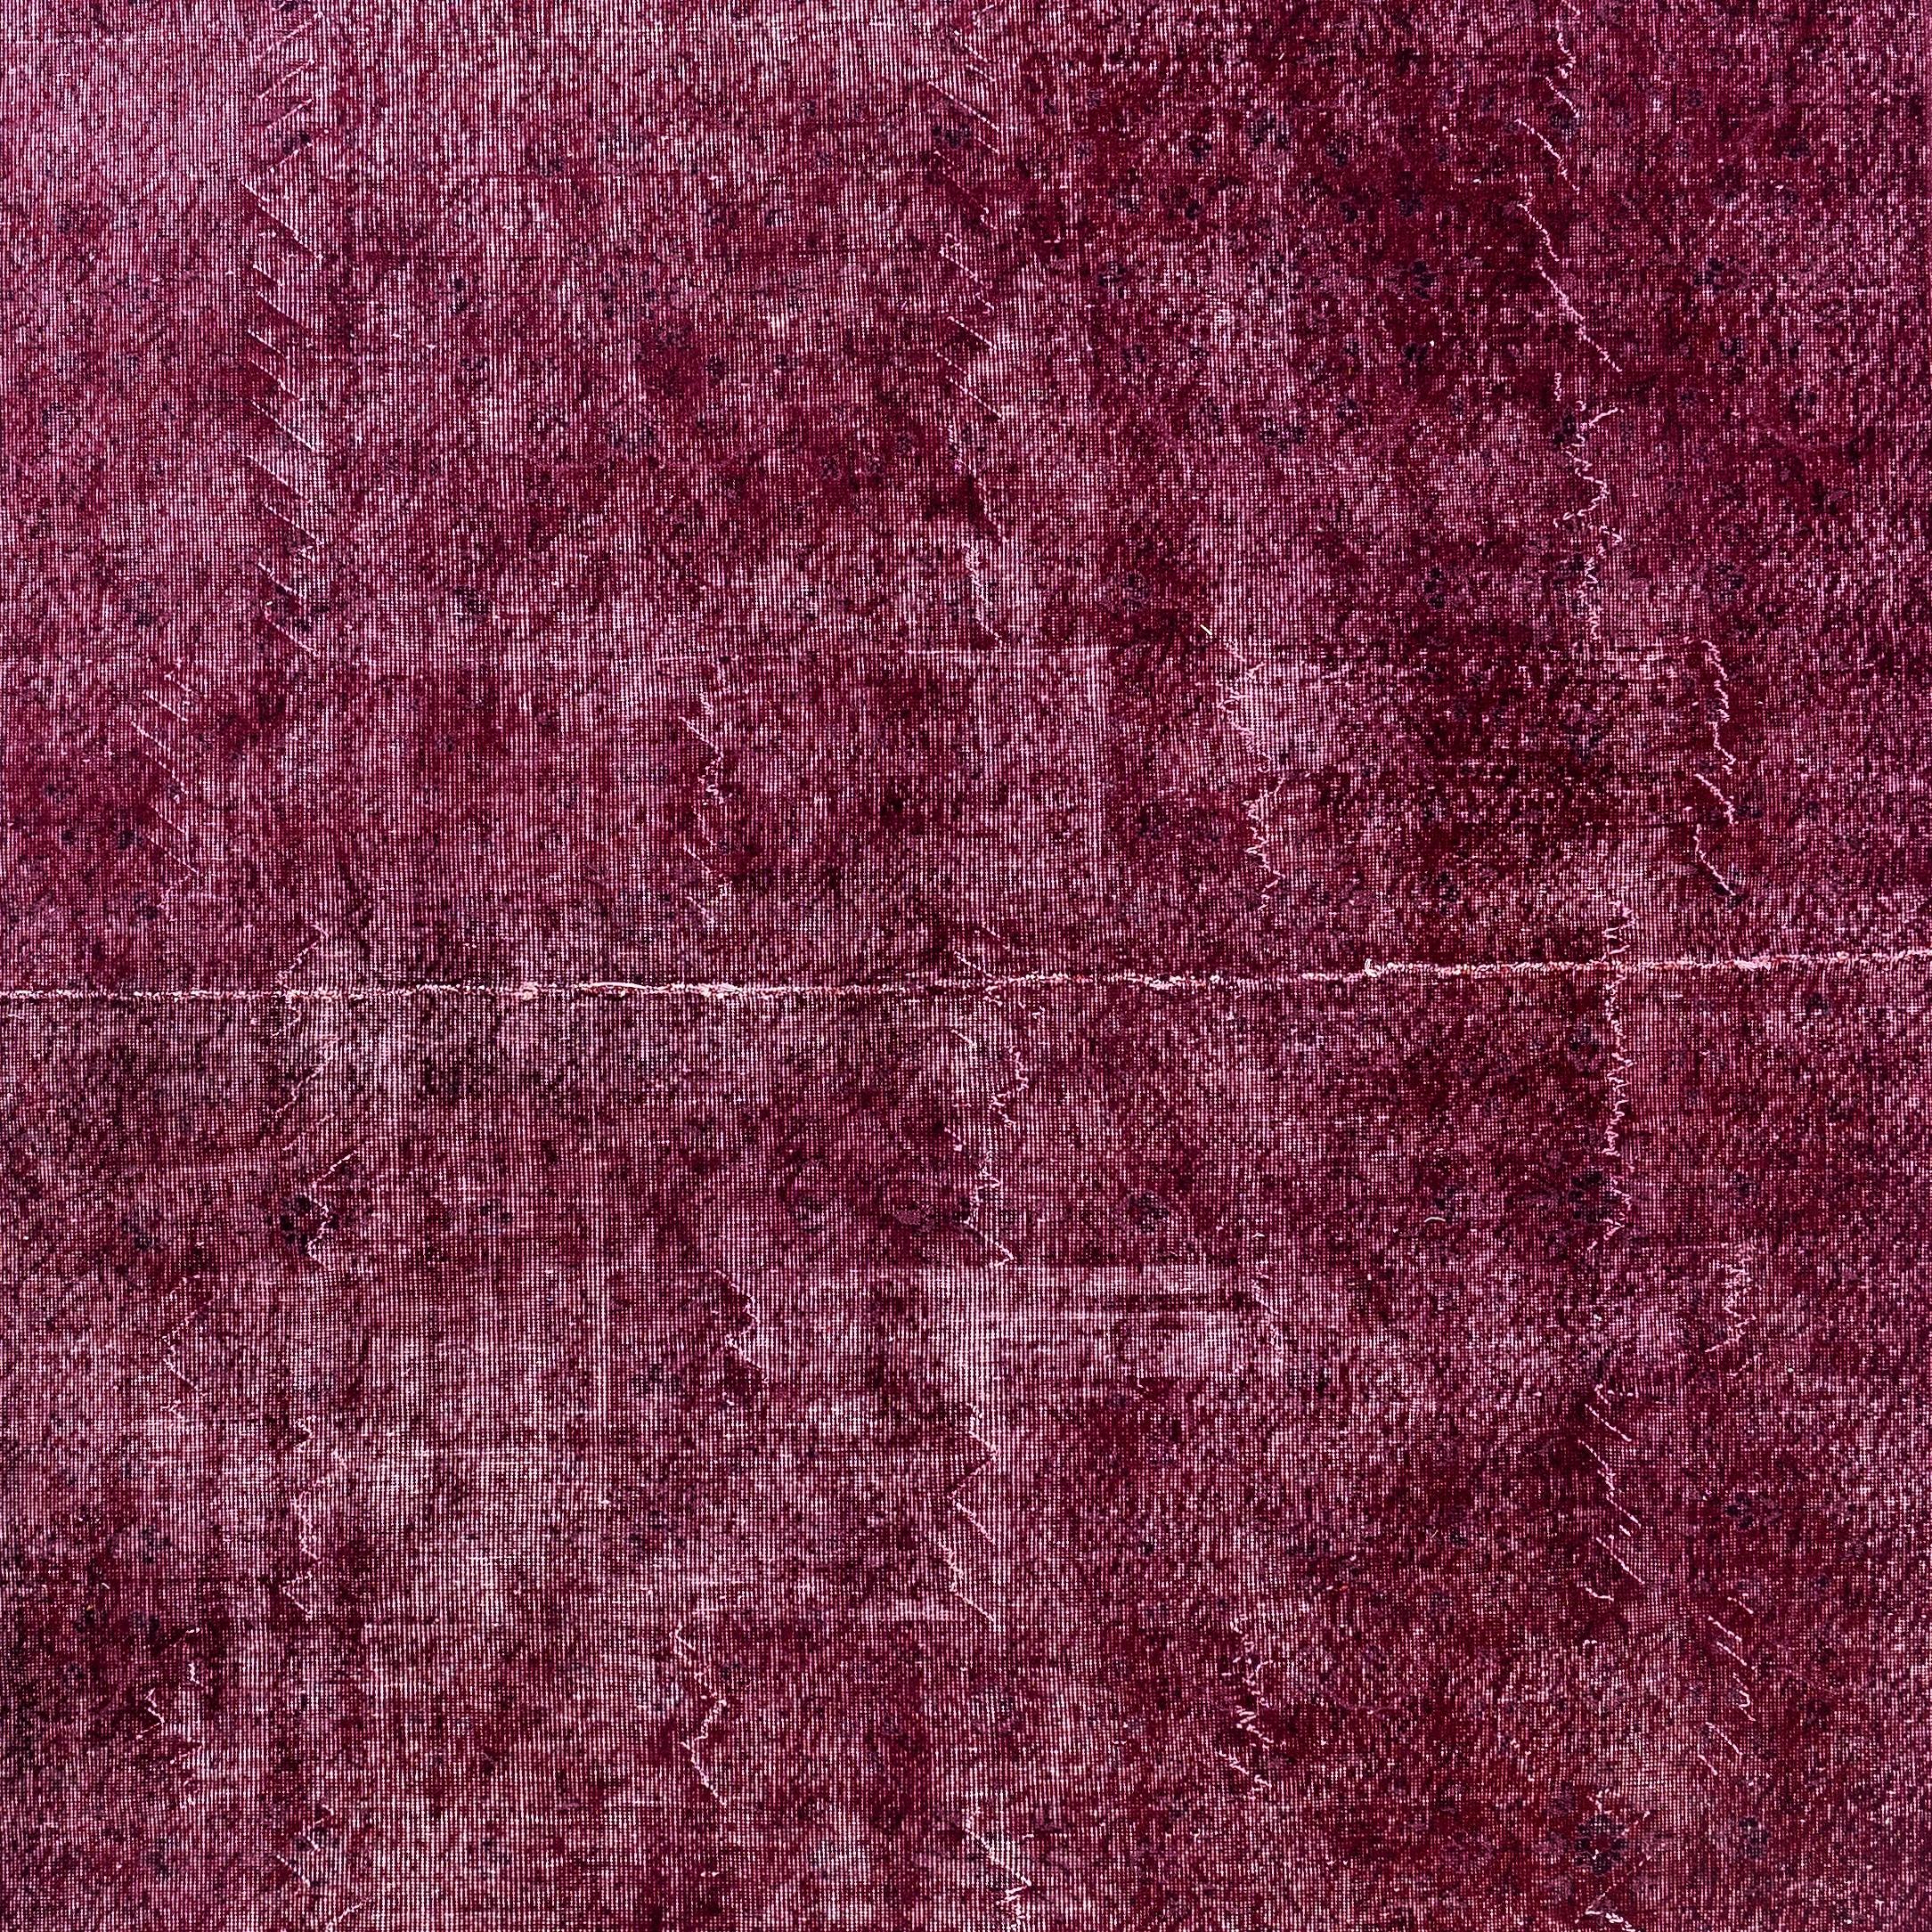 Hand-Knotted 9x13 Ft Handmade Turkish Large Rug in Burgundy Red. Great 4 Modern Interiors For Sale